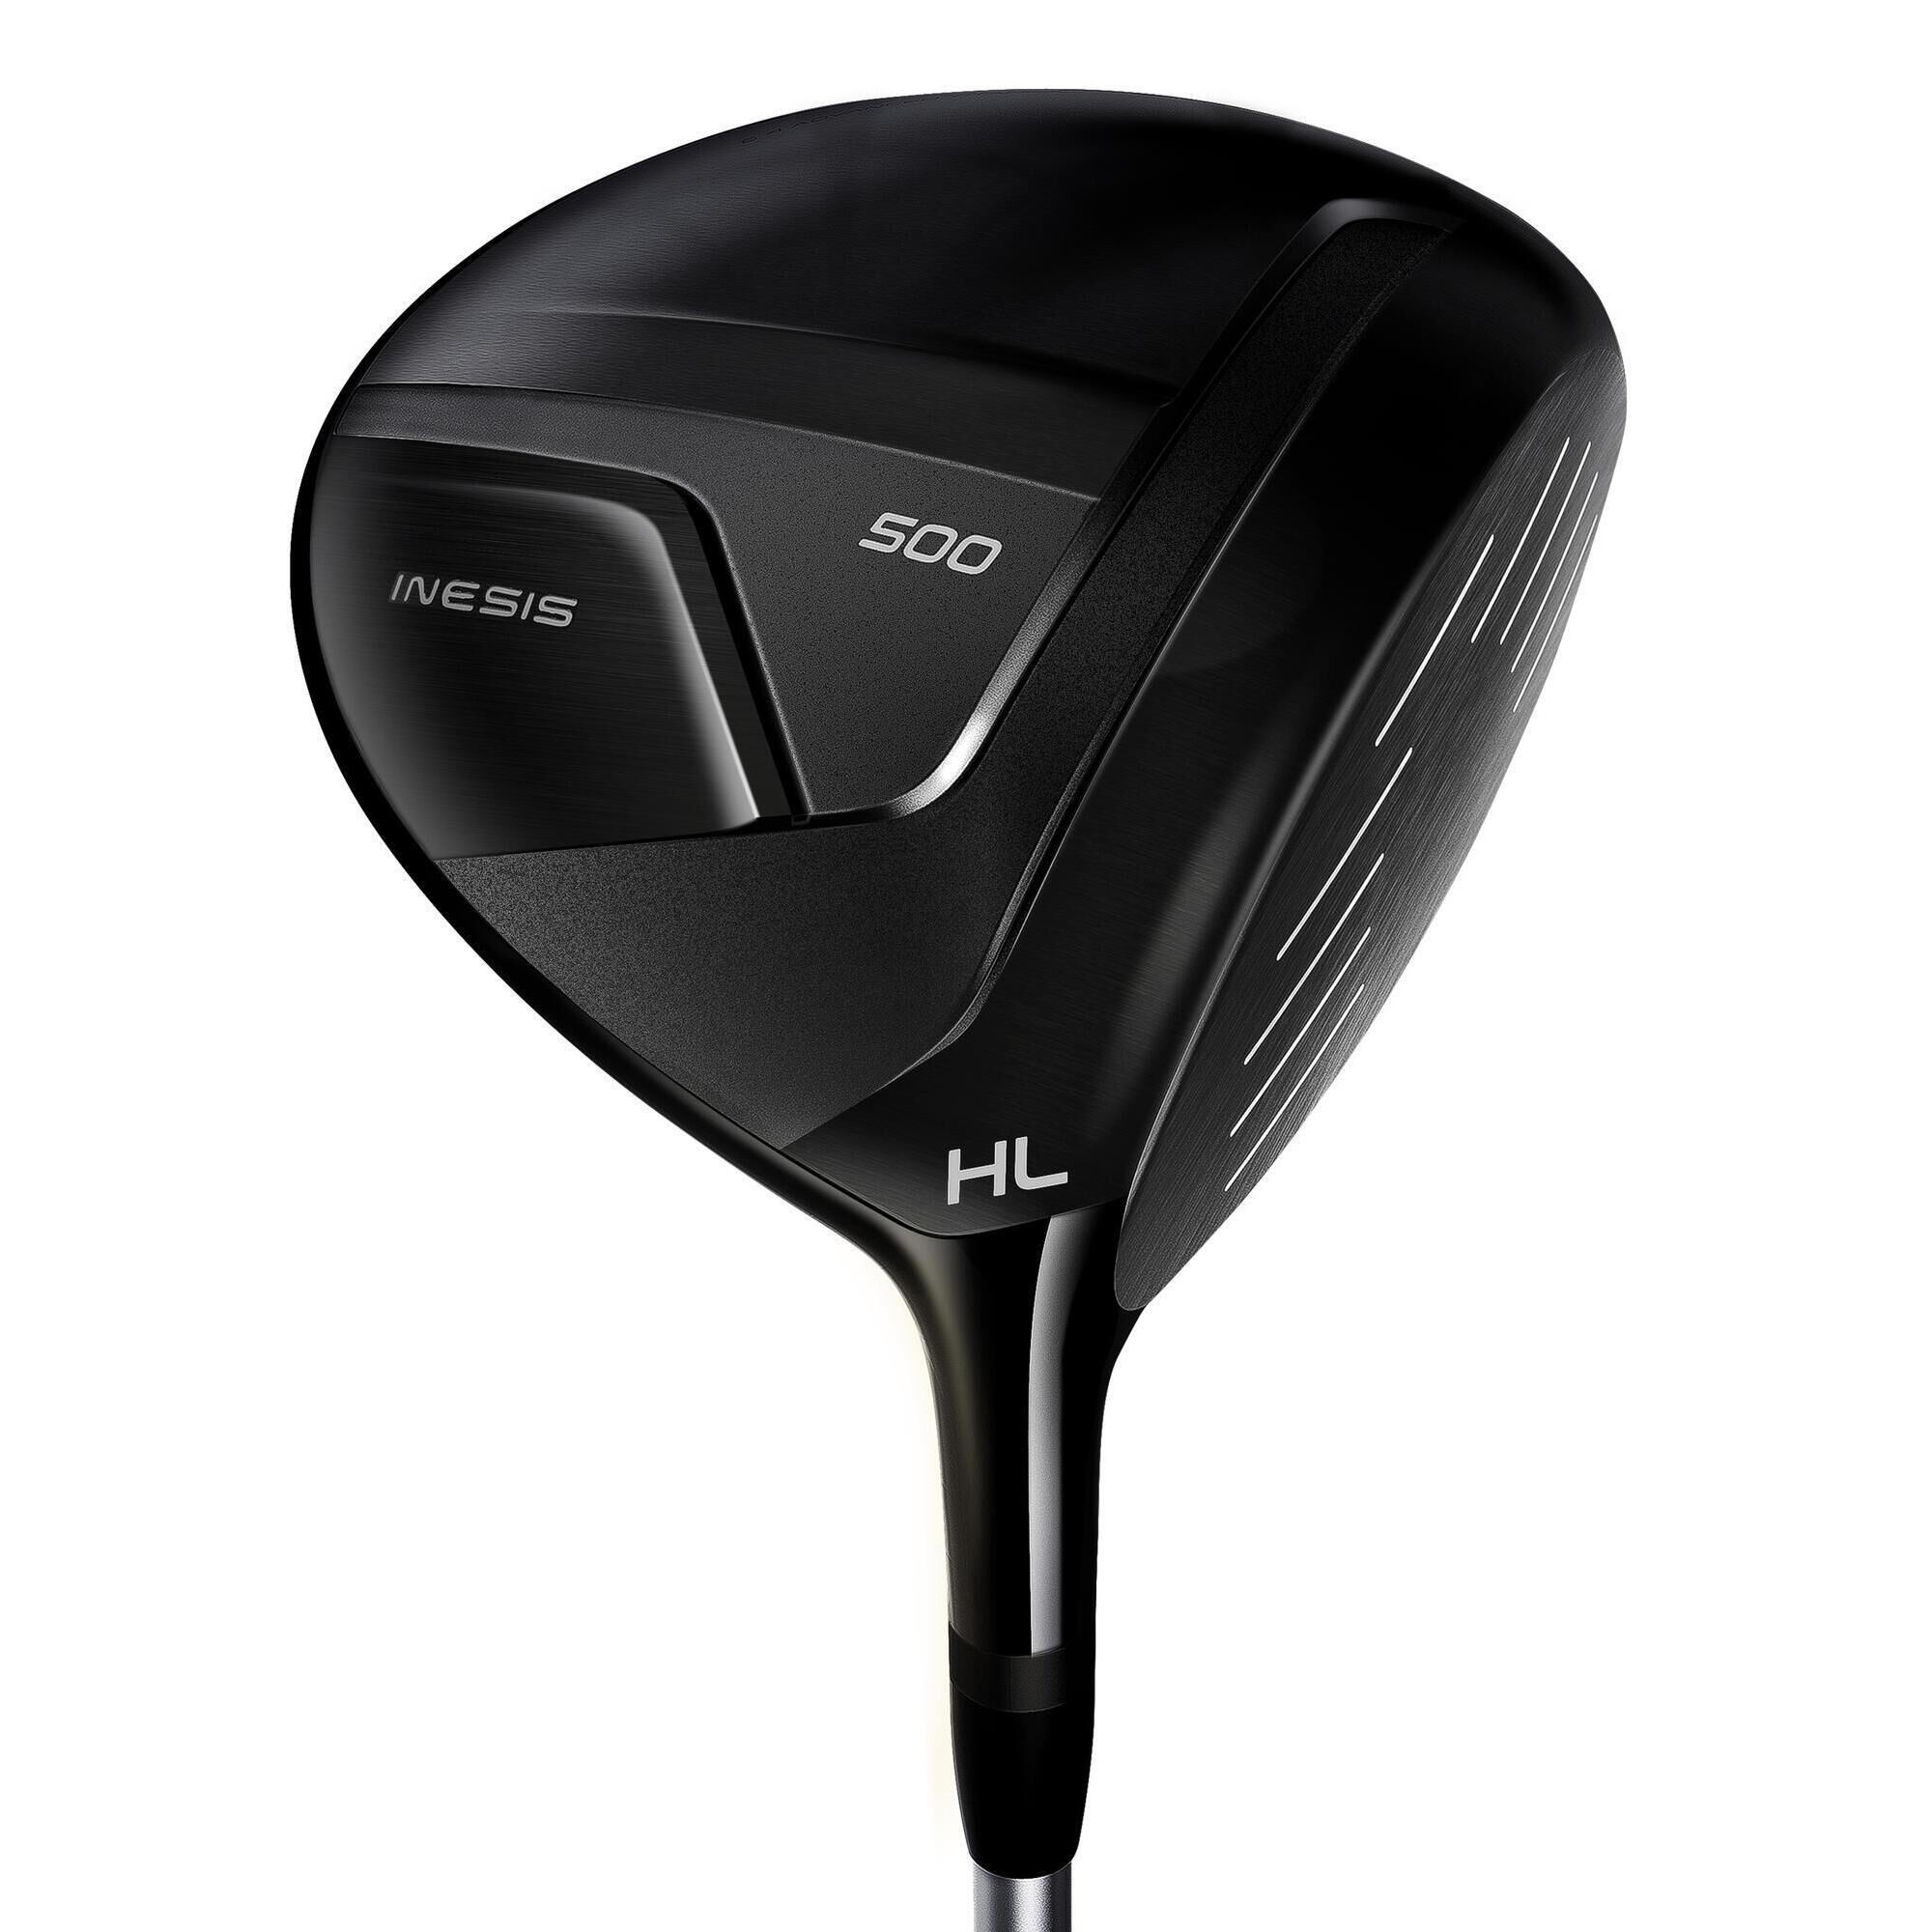 INESIS GOLF DRIVER 500 RIGHT HANDED SIZE 1 & LOW SPEED